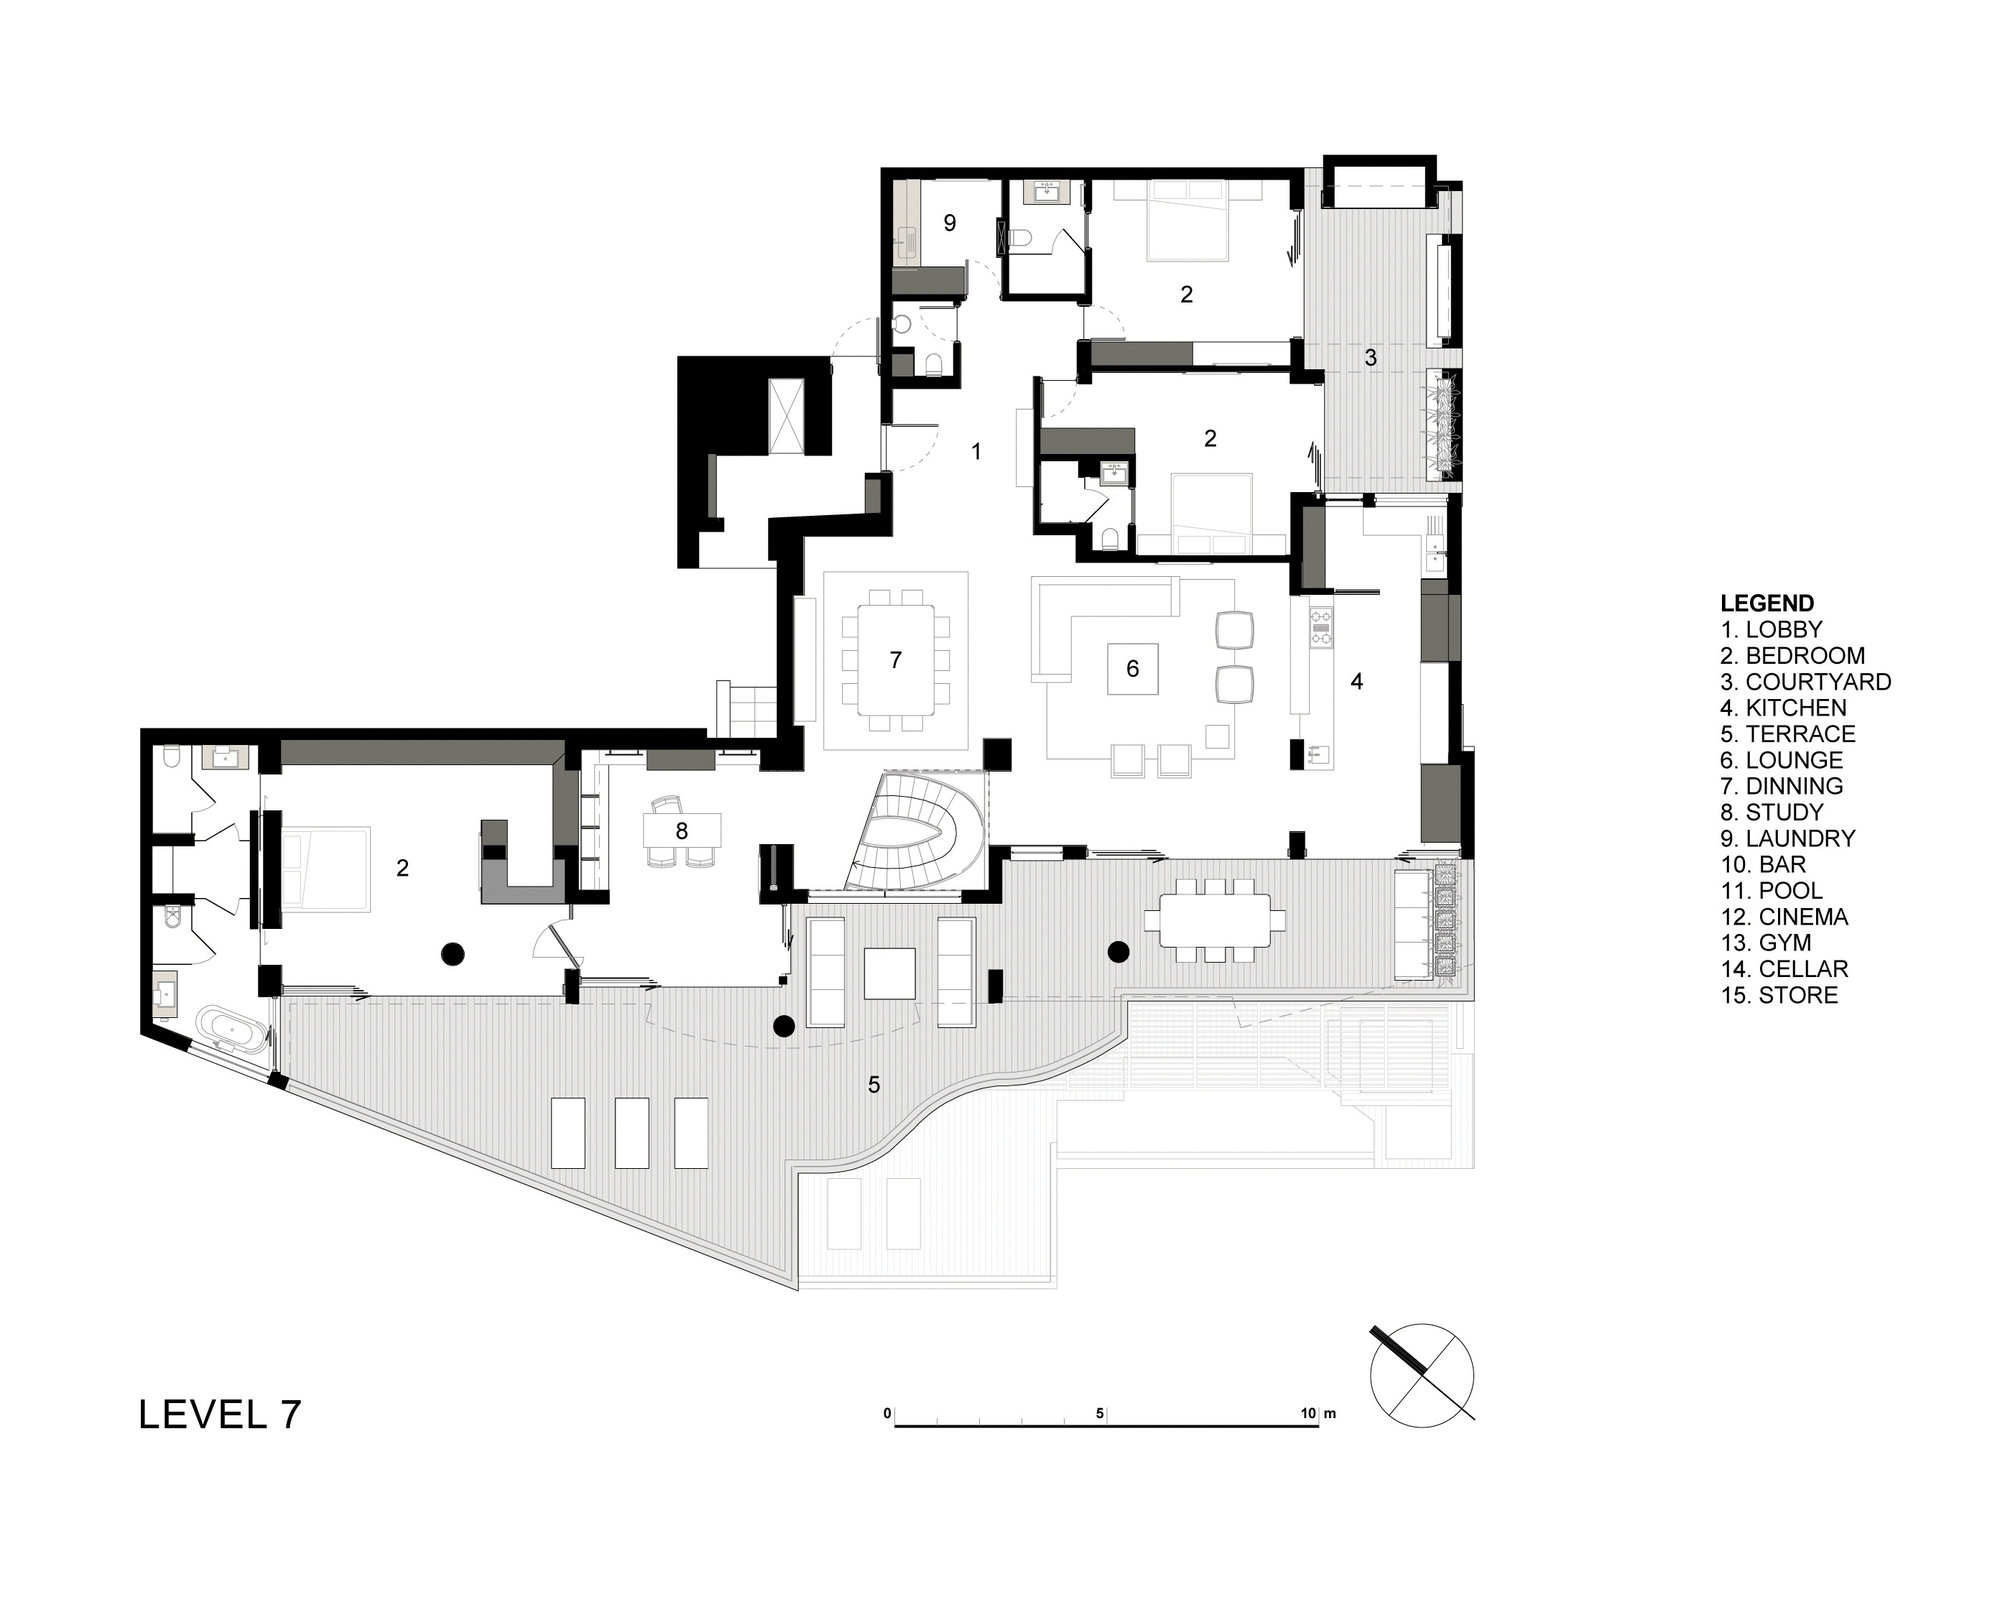 Level 7 Floor Plan - Clifton View 7 Luxury Apartment - Cape Town, South Africa